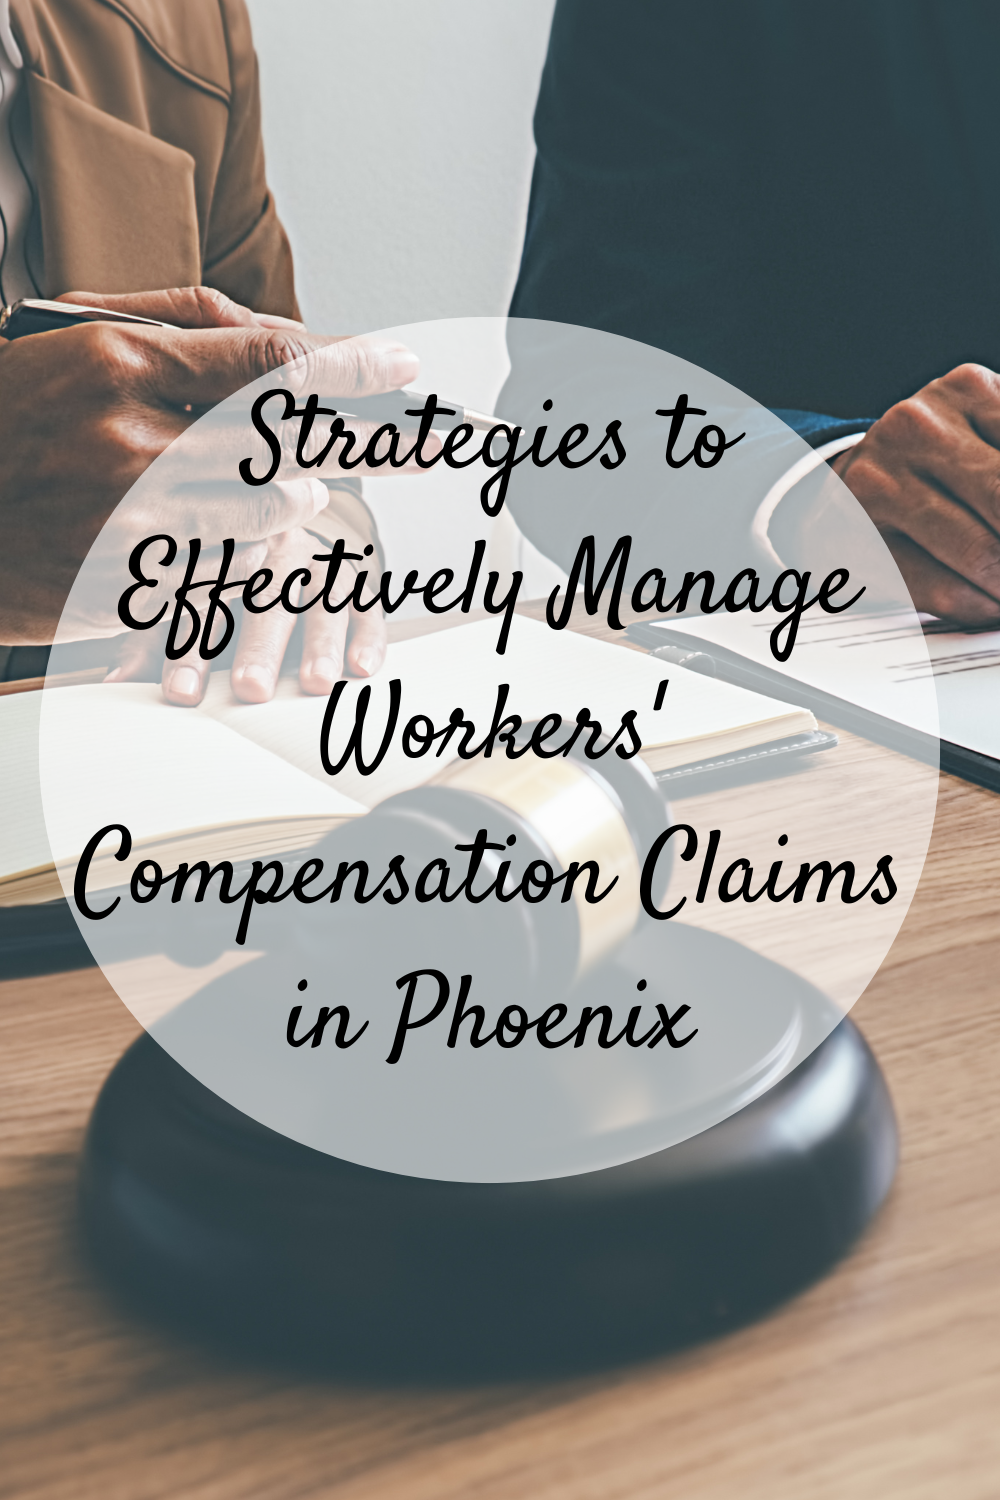 Strategies to Effectively Manage Workers’ Compensation Claims in Phoenix